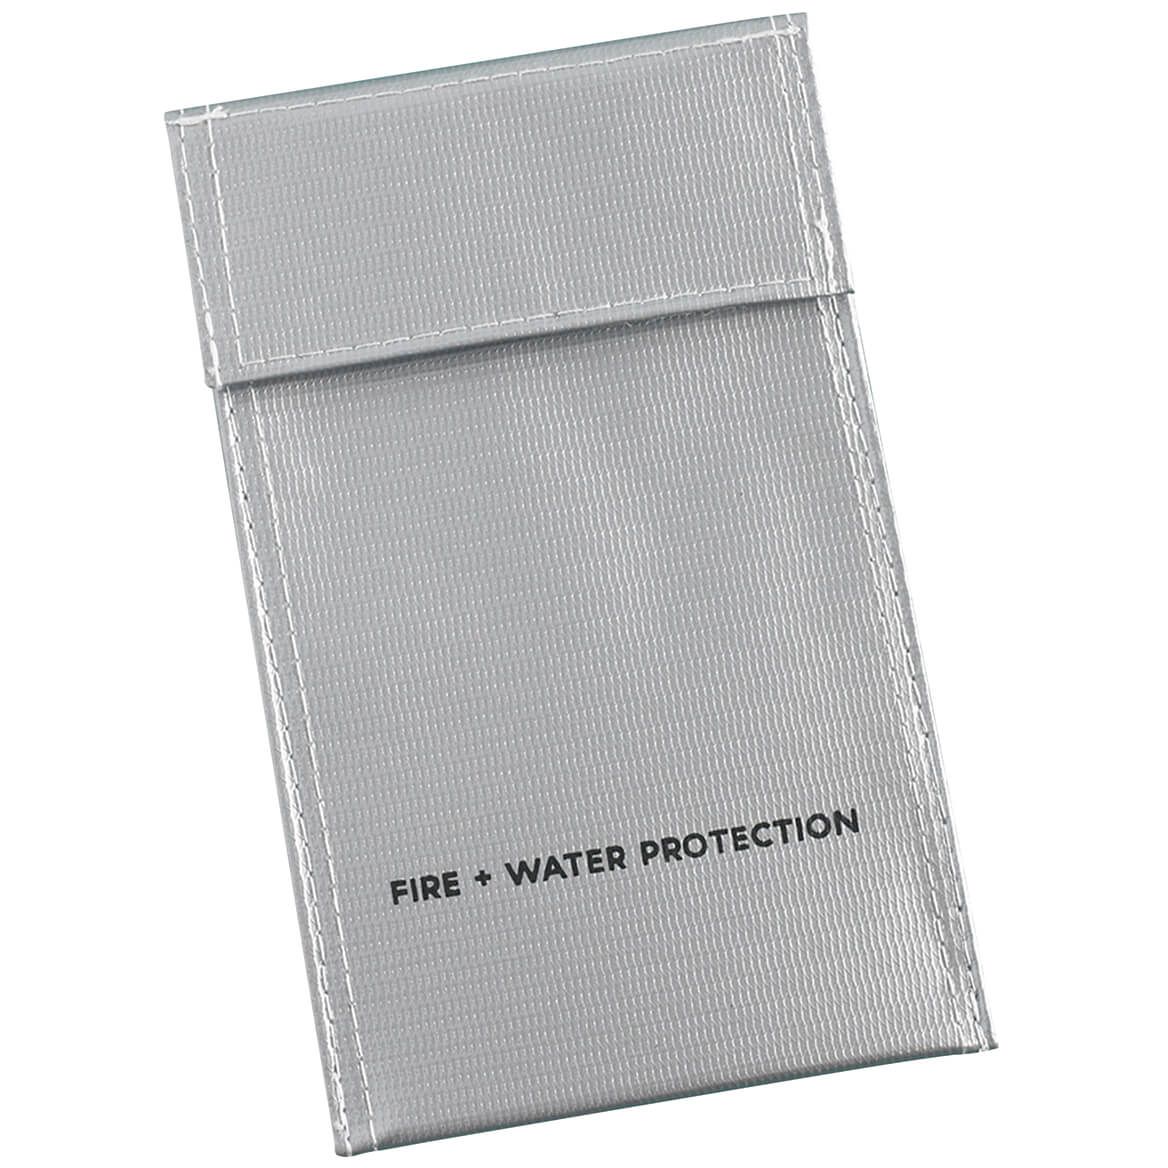 Fire and Water Proof Document Bag + '-' + 375492